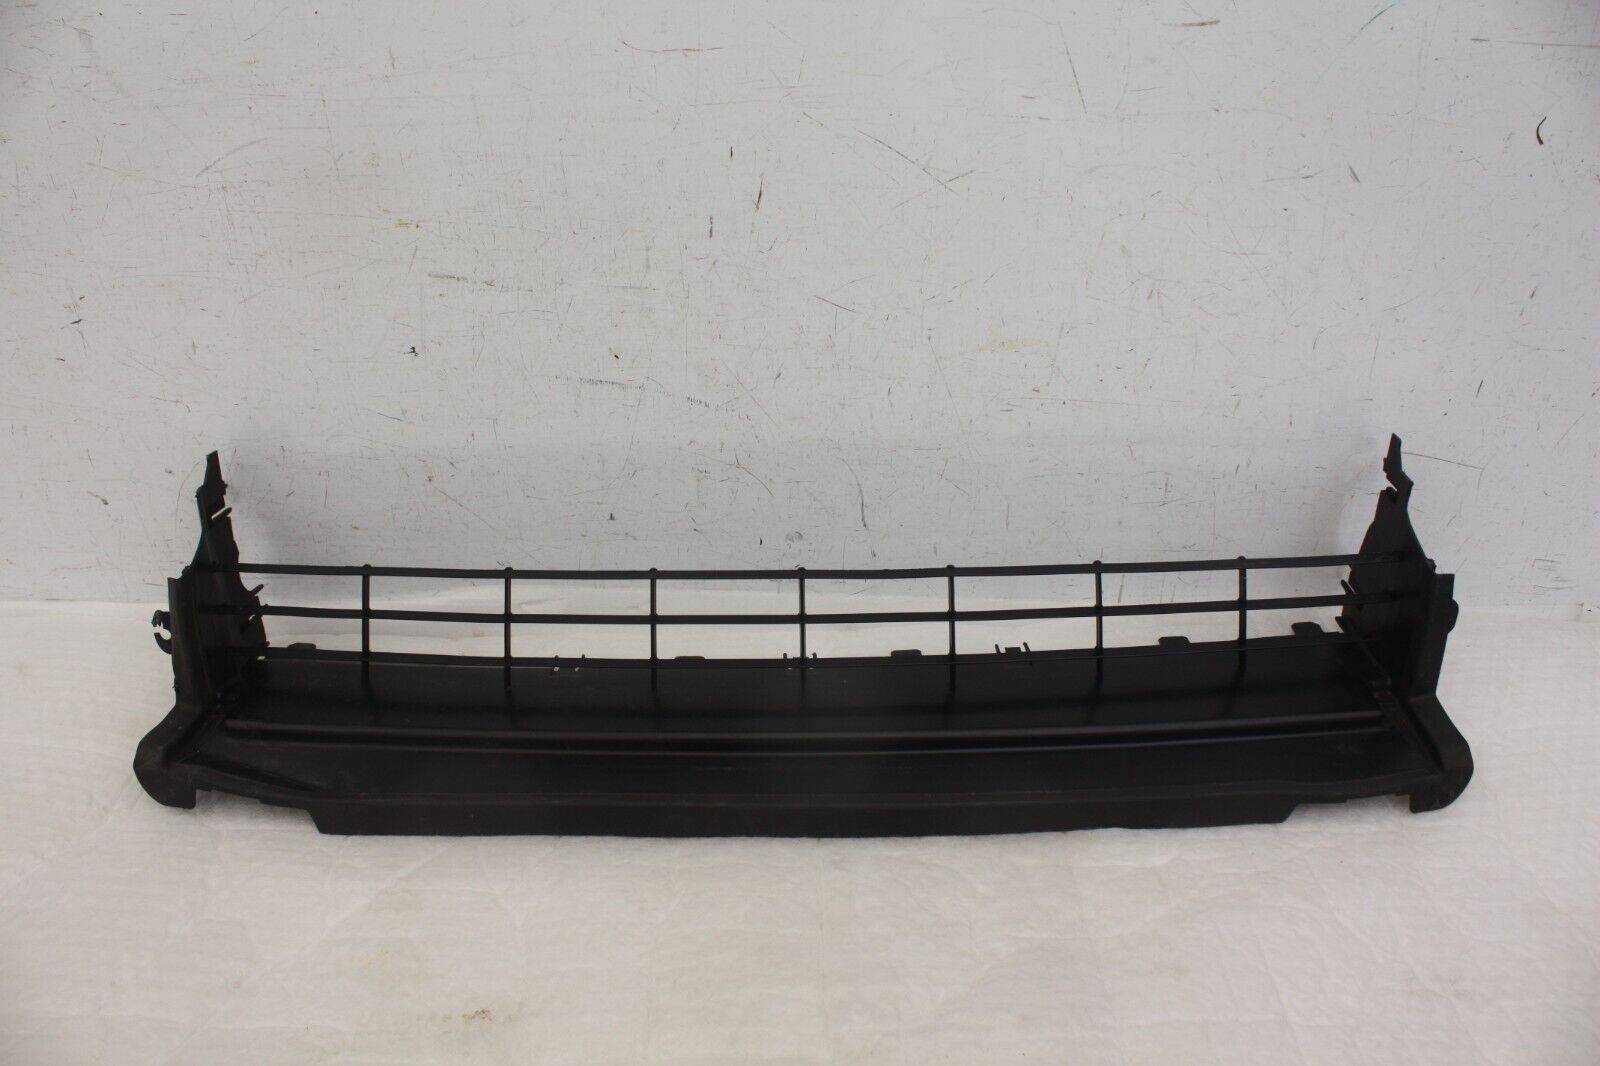 Ford EcoSport Front Bumper Lower Grill GN15 8B412 D Genuine 176343987248